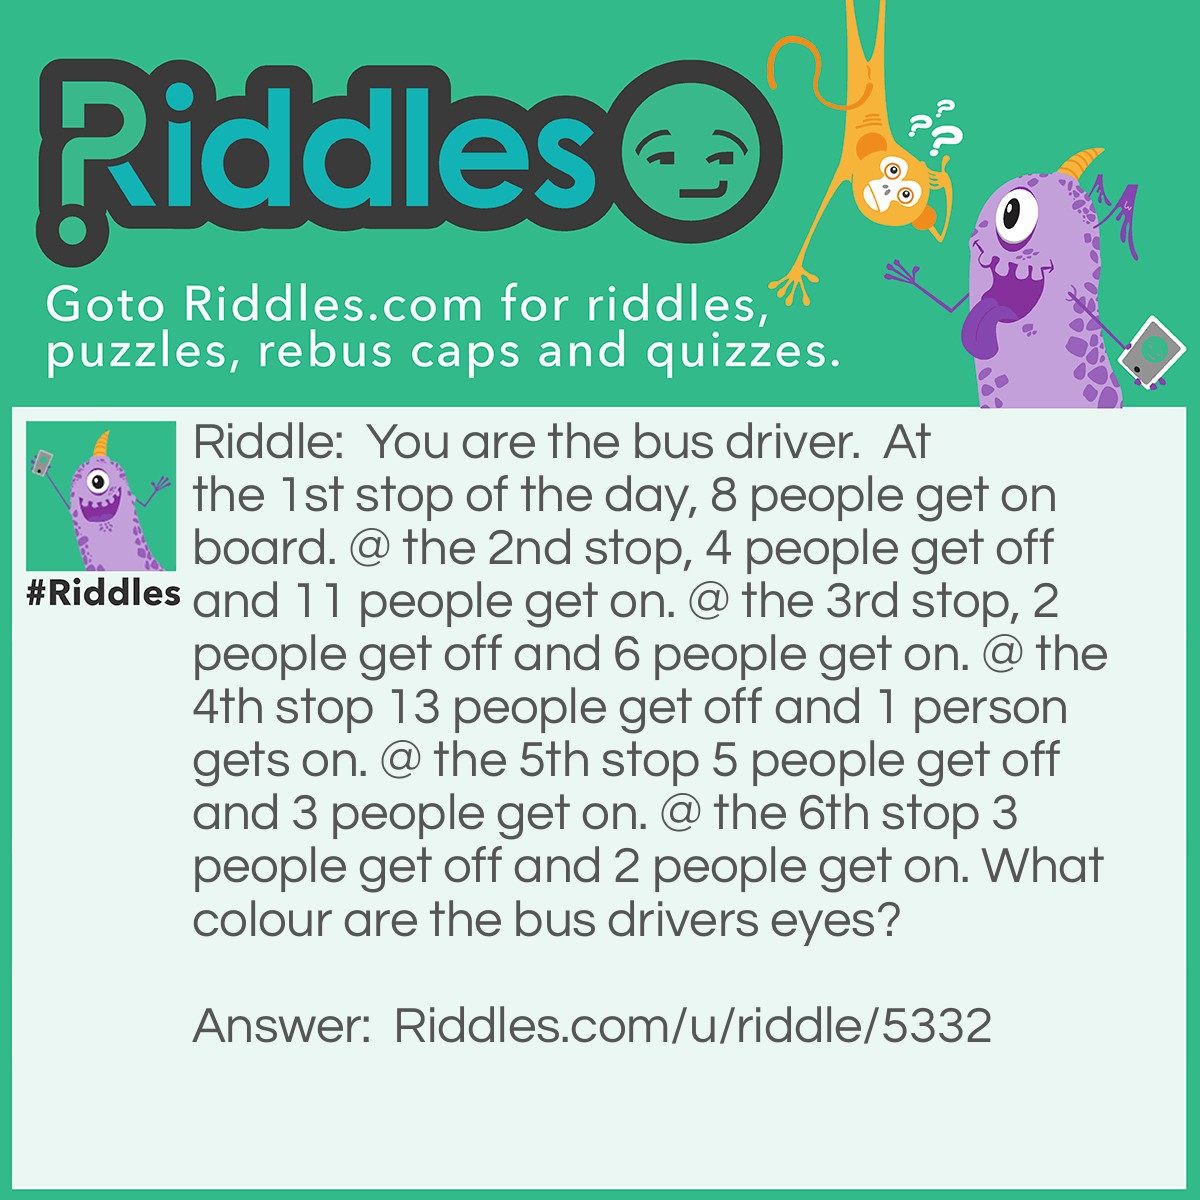 Riddle: You are the bus driver.  At the 1st stop of the day, 8 people get on board. @ the 2nd stop, 4 people get off and 11 people get on. @ the 3rd stop, 2 people get off and 6 people get on. @ the 4th stop 13 people get off and 1 person gets on. @ the 5th stop 5 people get off and 3 people get on. @ the 6th stop 3 people get off and 2 people get on. What colour are the bus drivers eyes? Answer: Whatever colour your eyes are because you are the bus driver.